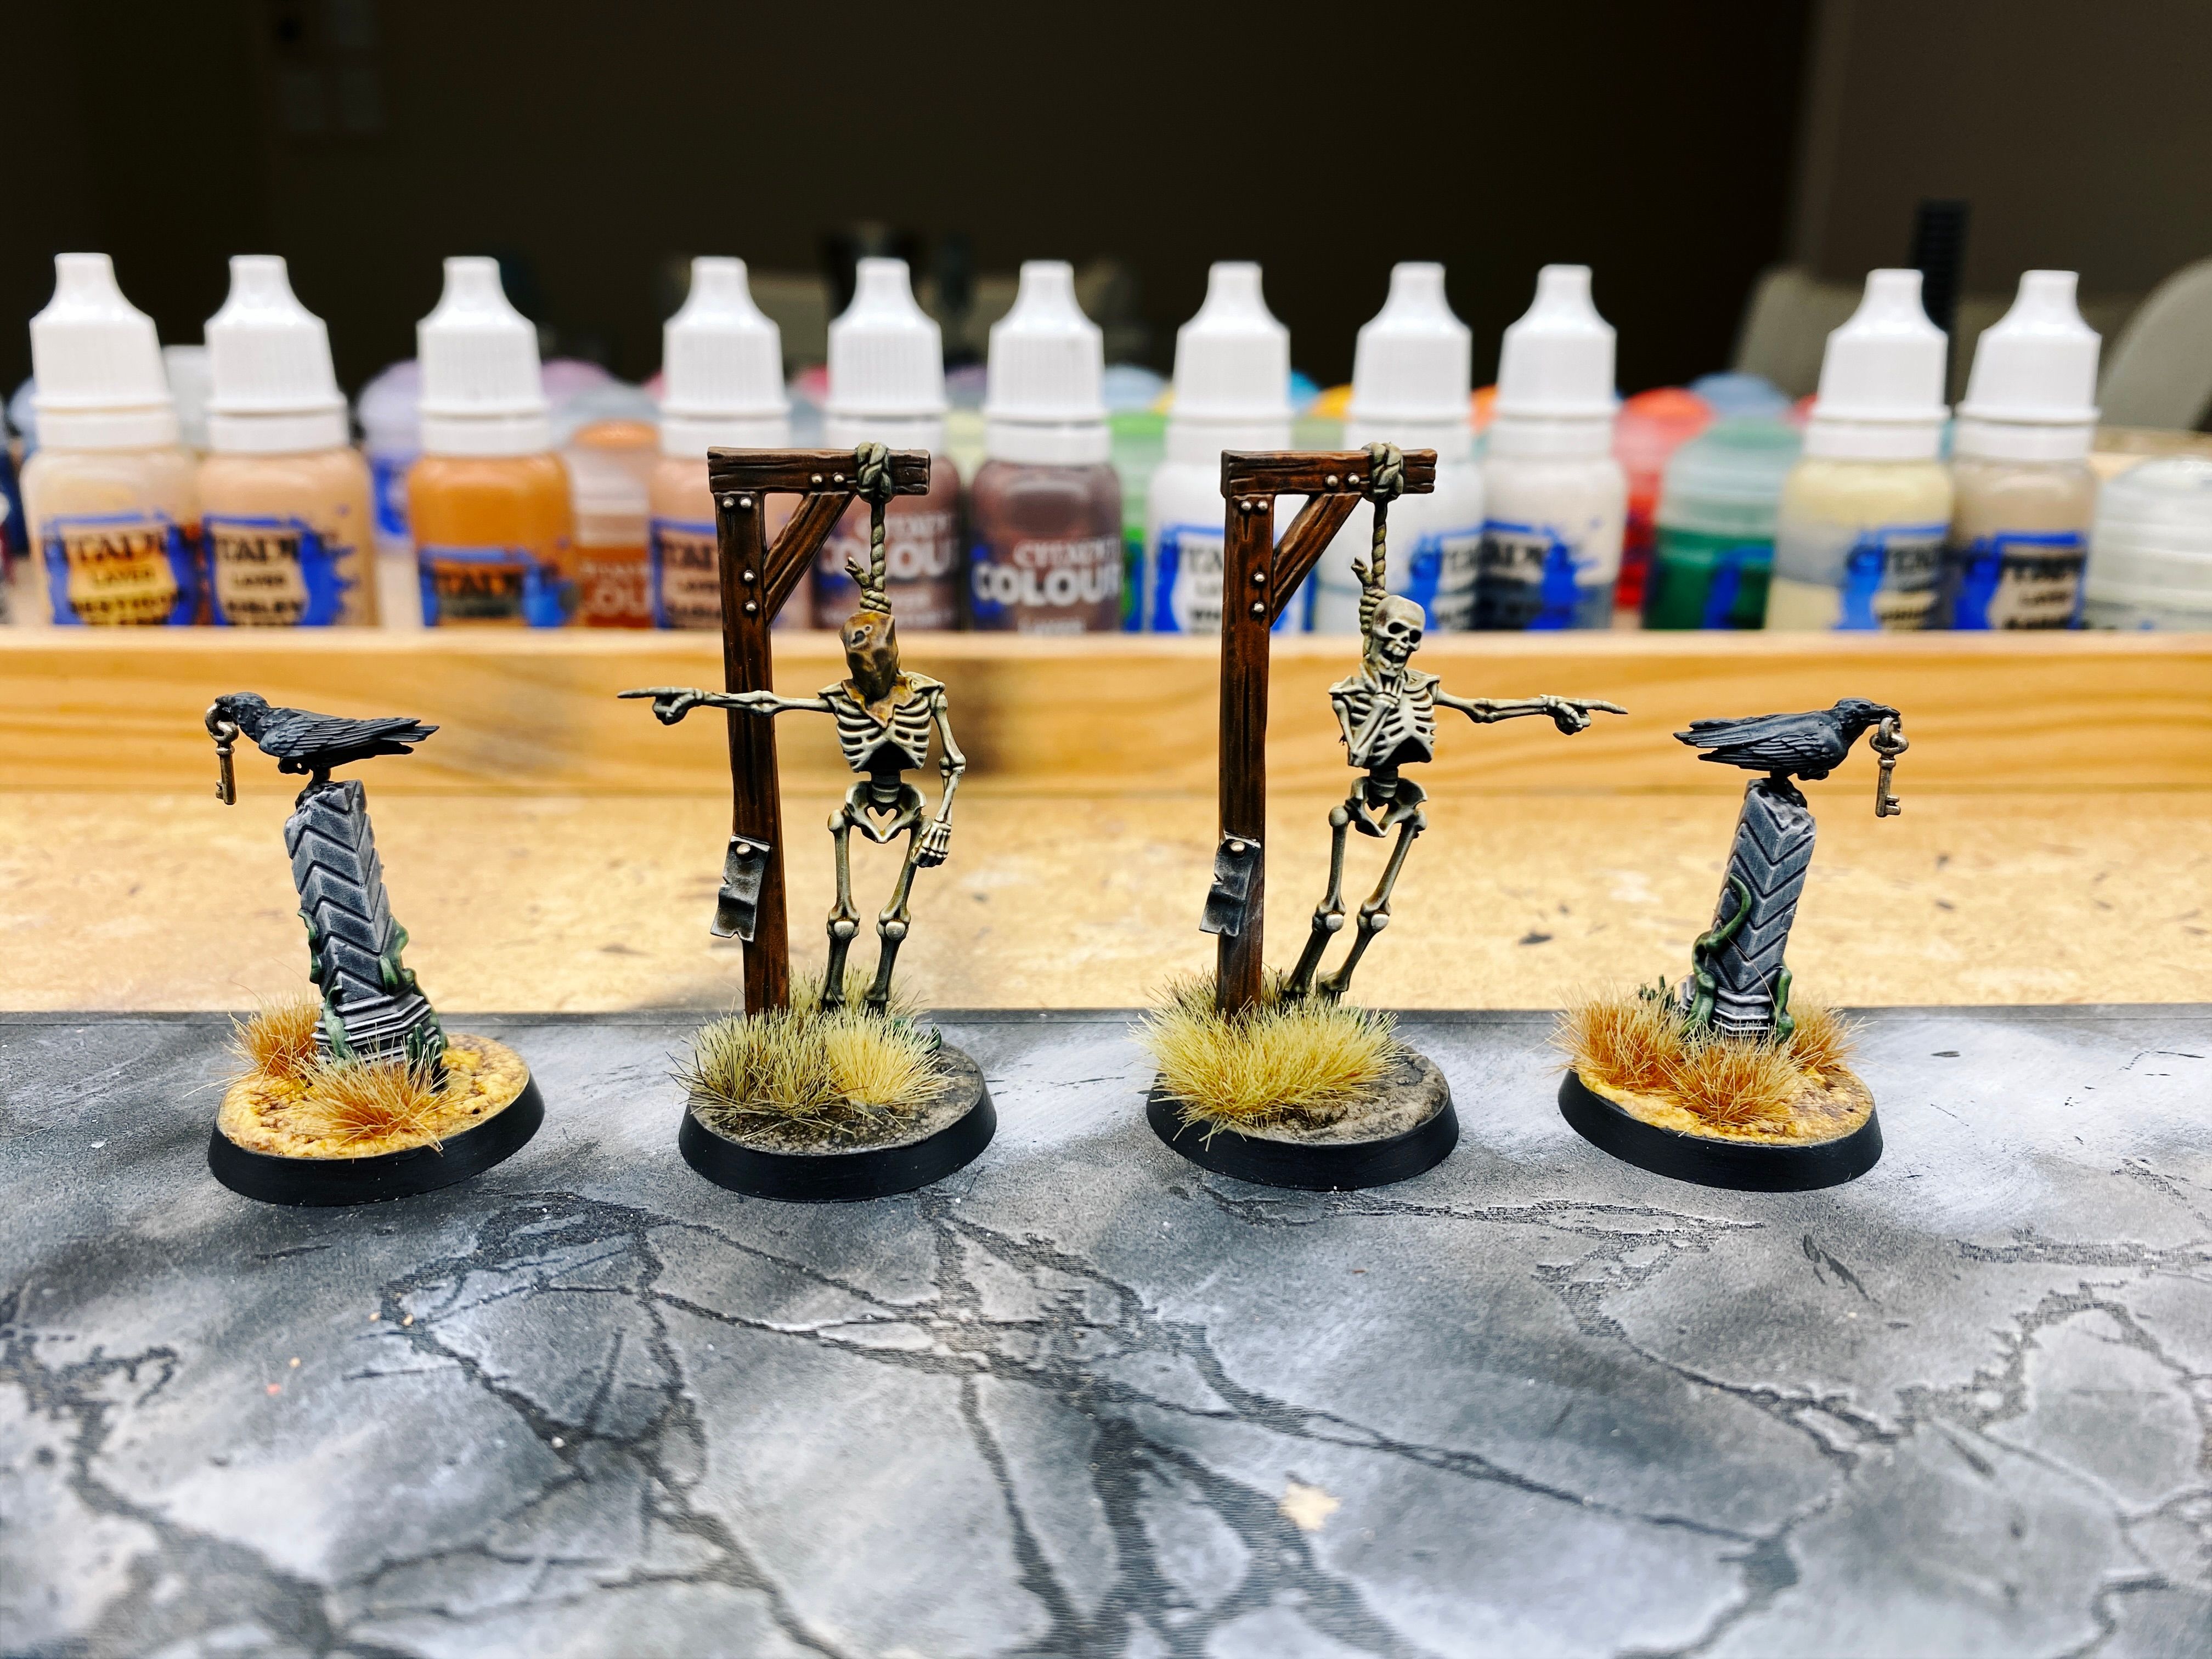 A photo of painted four miniatures. Two are skeletons that have been clearly executed by hanging from fairly hastily-erected gallows but somewhat creepily they both have one arm up and are pointing at something. The bases look like dirt and have some greeny/brown grass tufts on them. The other two are crows that are standing on top of a ruined column, with a key hanging from their beaks. The bases of these look like some sort of yellow stone and have very dry-looking grass tufts on them.